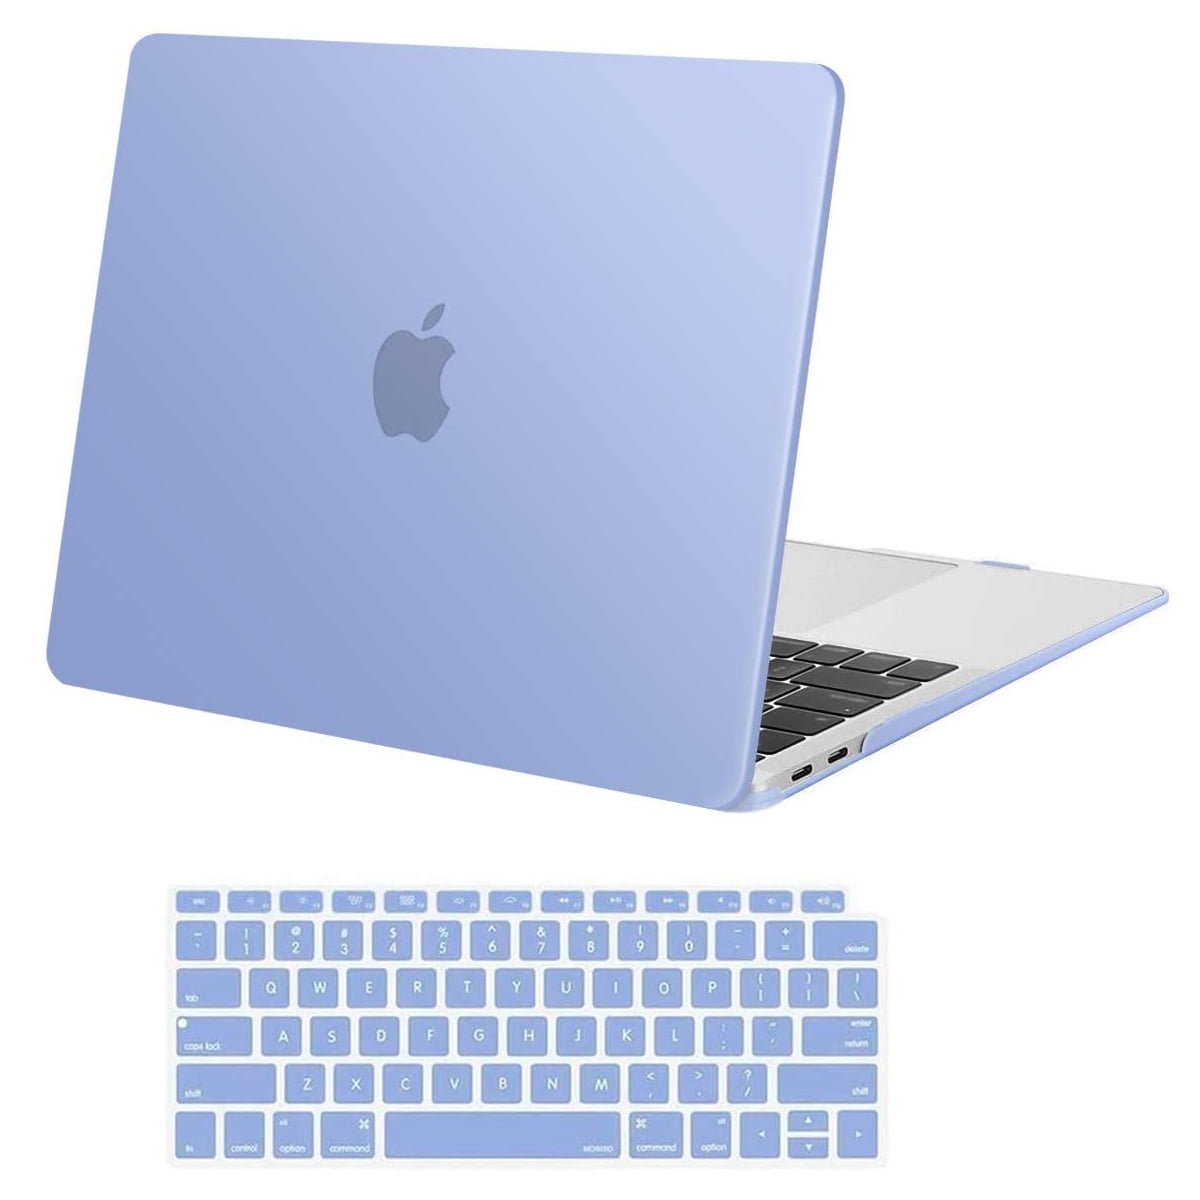 Light Purple Plastic Hard Shell&Keyboard Cover&Screen Protector&Storage Bag Compatible with MacBook Air 13 MOSISO MacBook Air 13 inch Case 2020 2019 2018 Release A2179 A1932 with Retina Display 